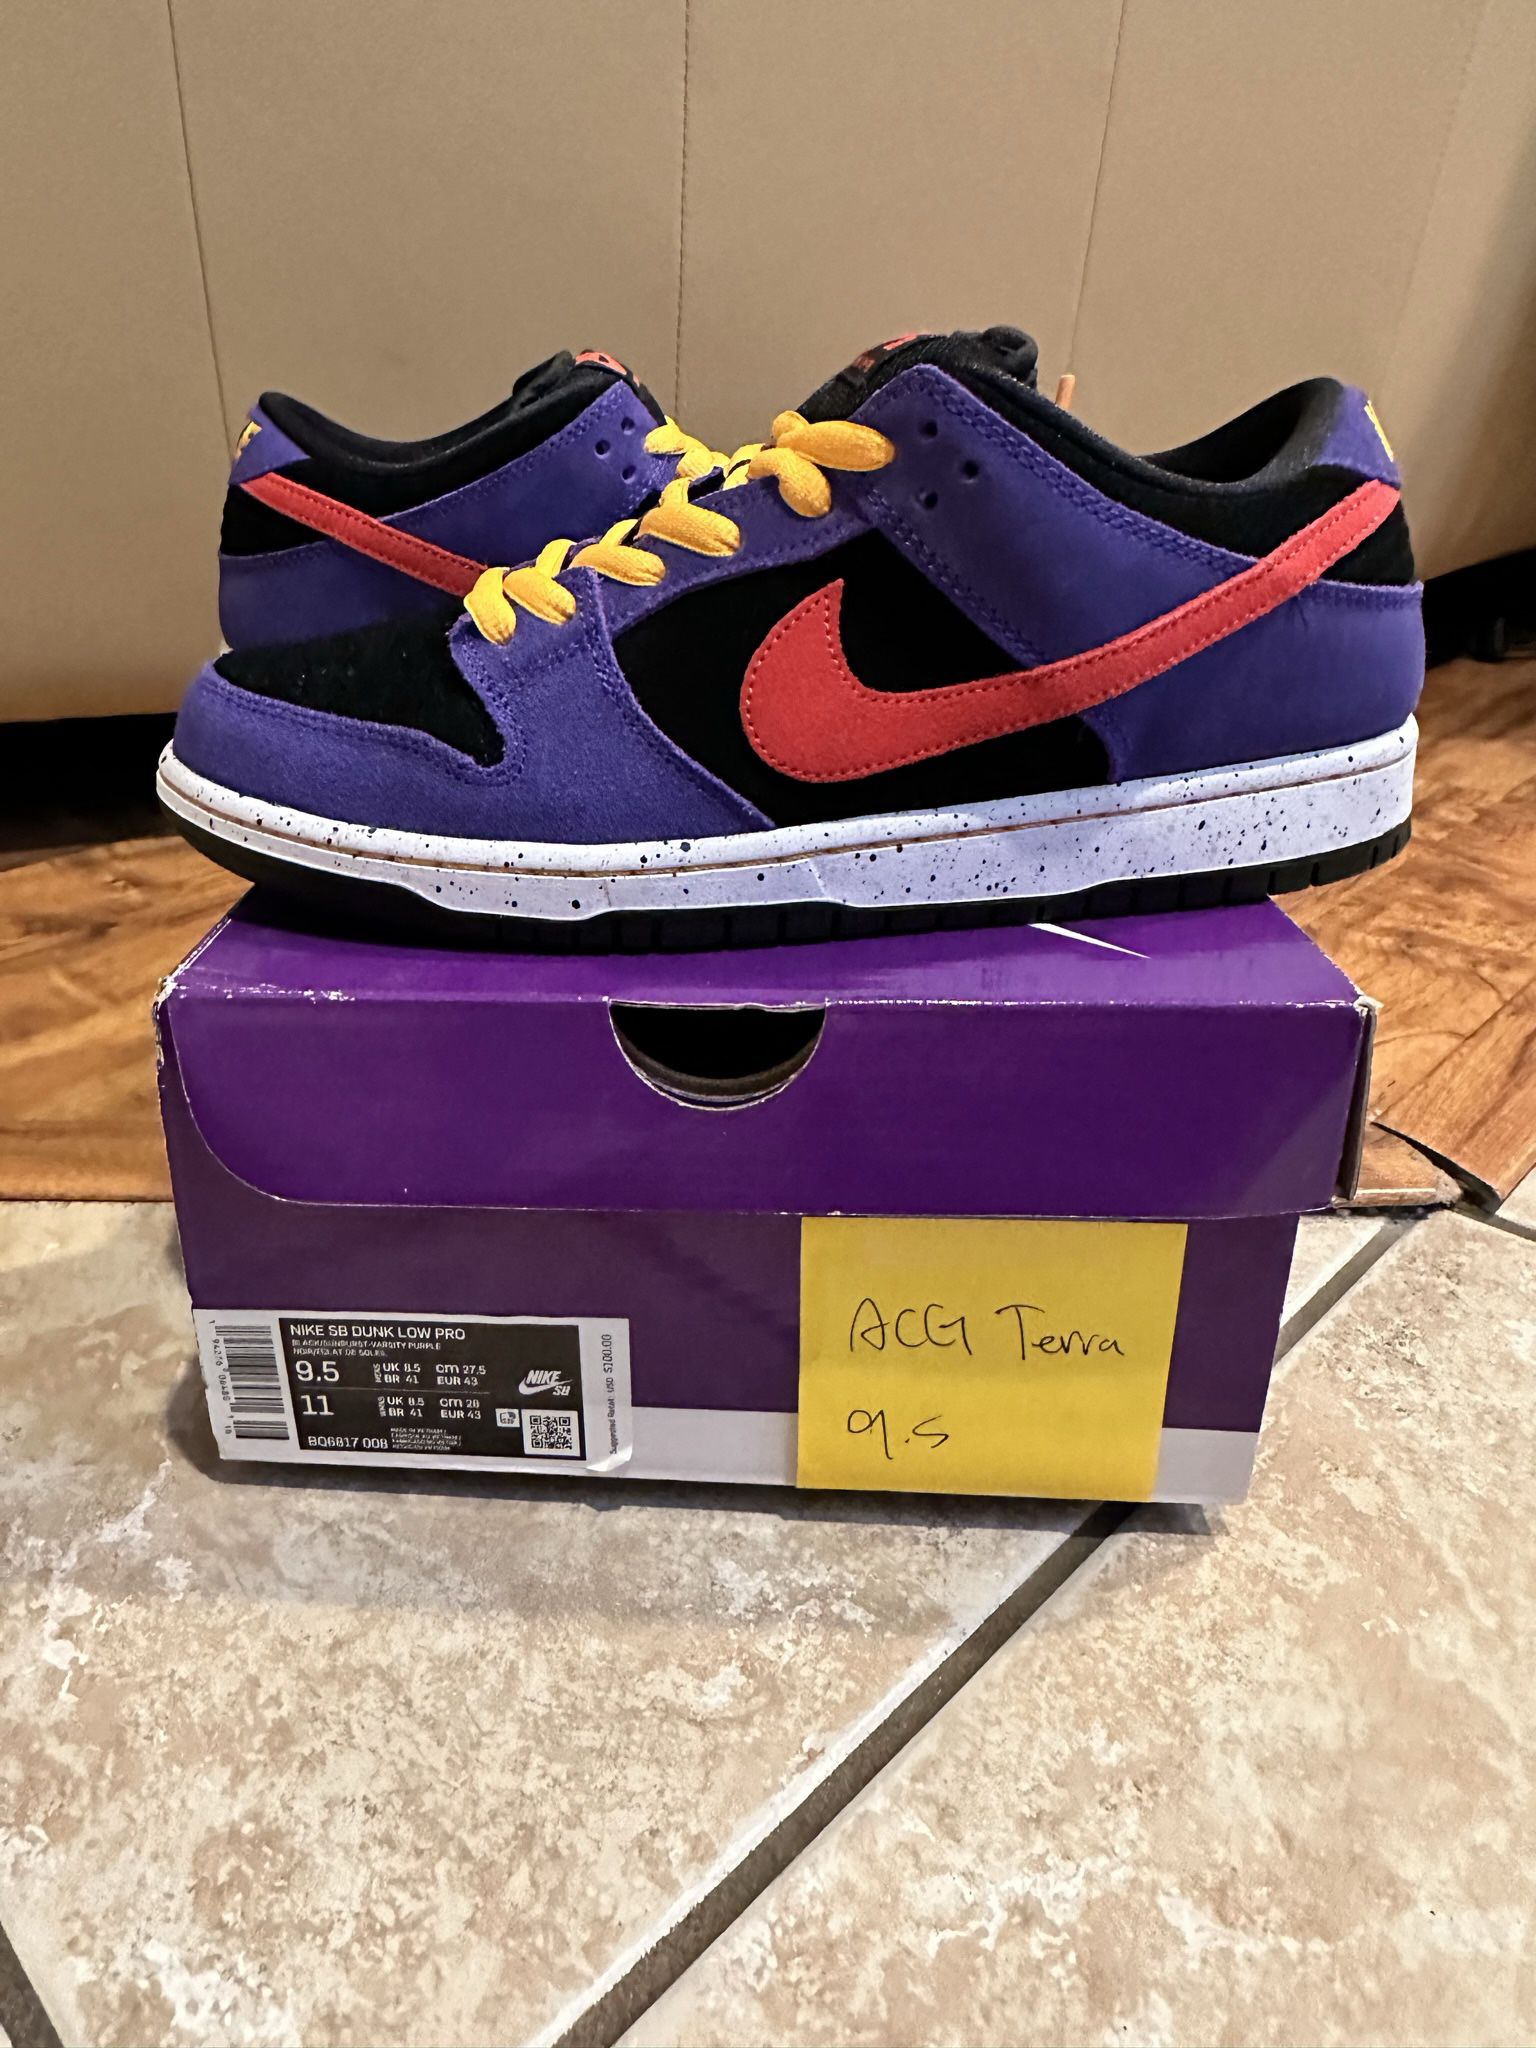 Nike SB Dunk Low ACG terra Size 9.5 Vnds for in San Diego, CA - OfferUp